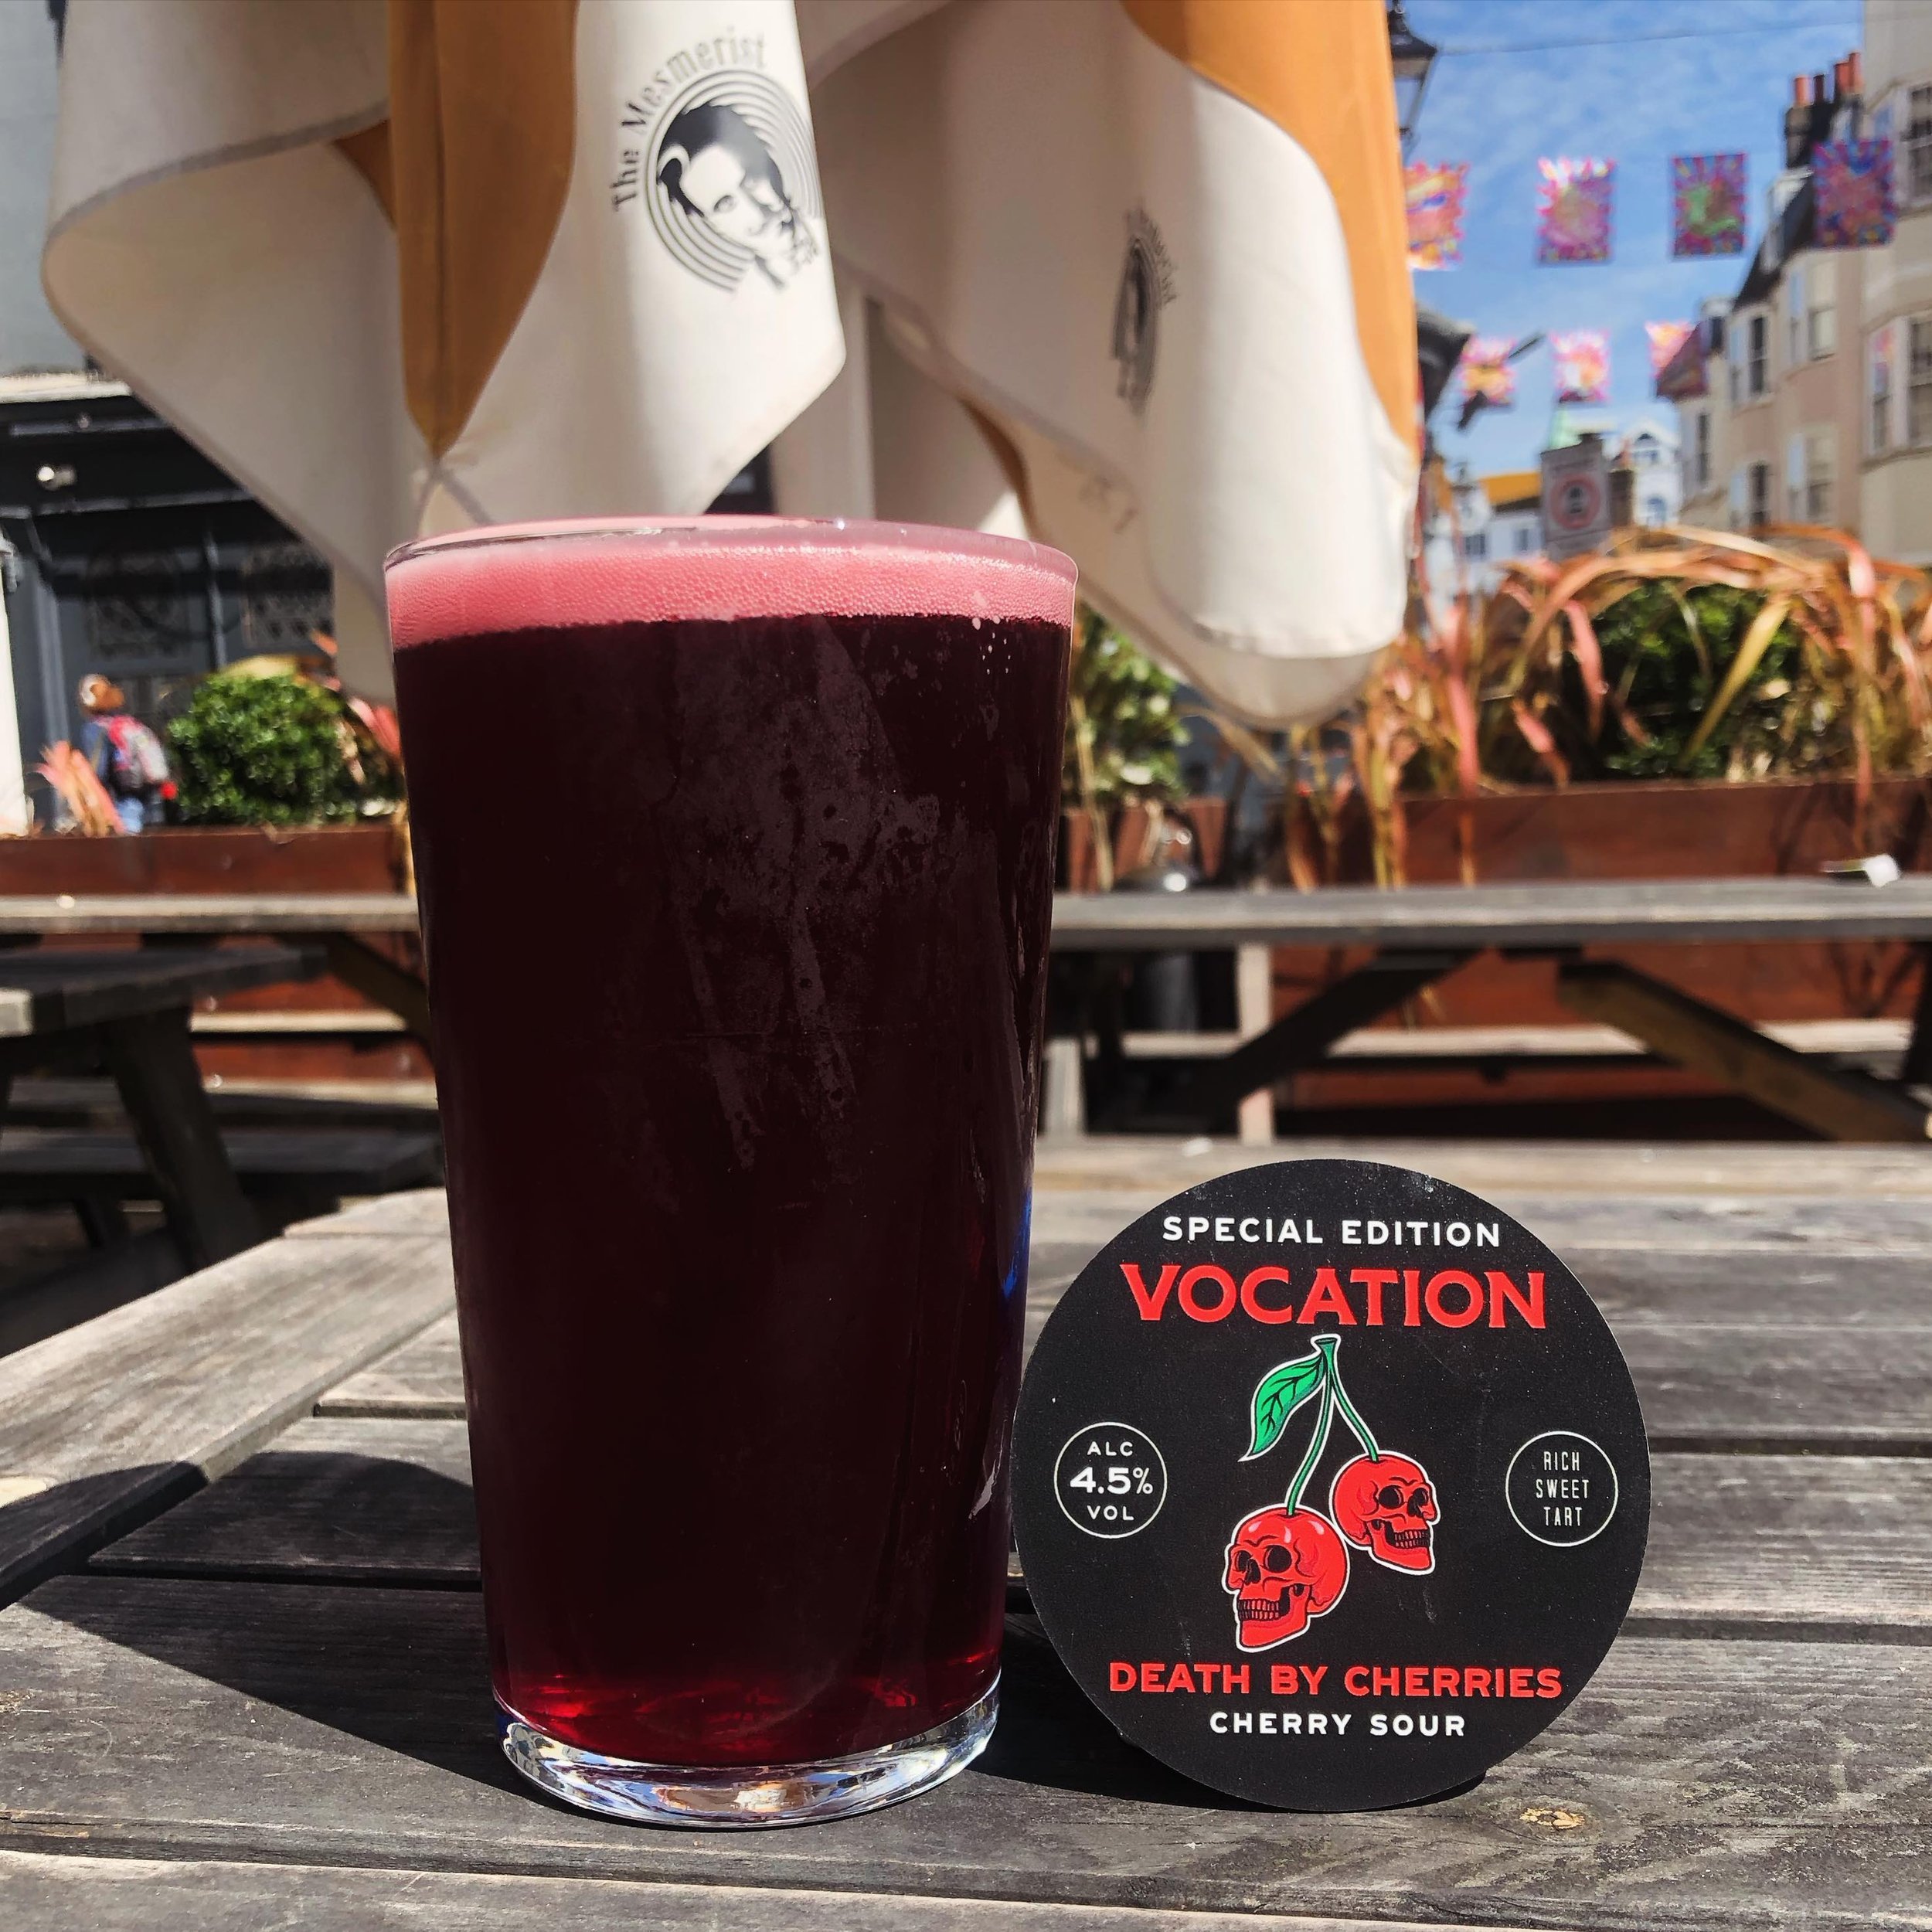 ‼️NEW GUEST BEER IN‼️ stoked to have @vocationbrewery Death by Cherries pouring at the Mesmerist. 4.5% and suitable for vegans, this intense mix of sweet and sour cherries hits the spot perfectly on these sunny days!